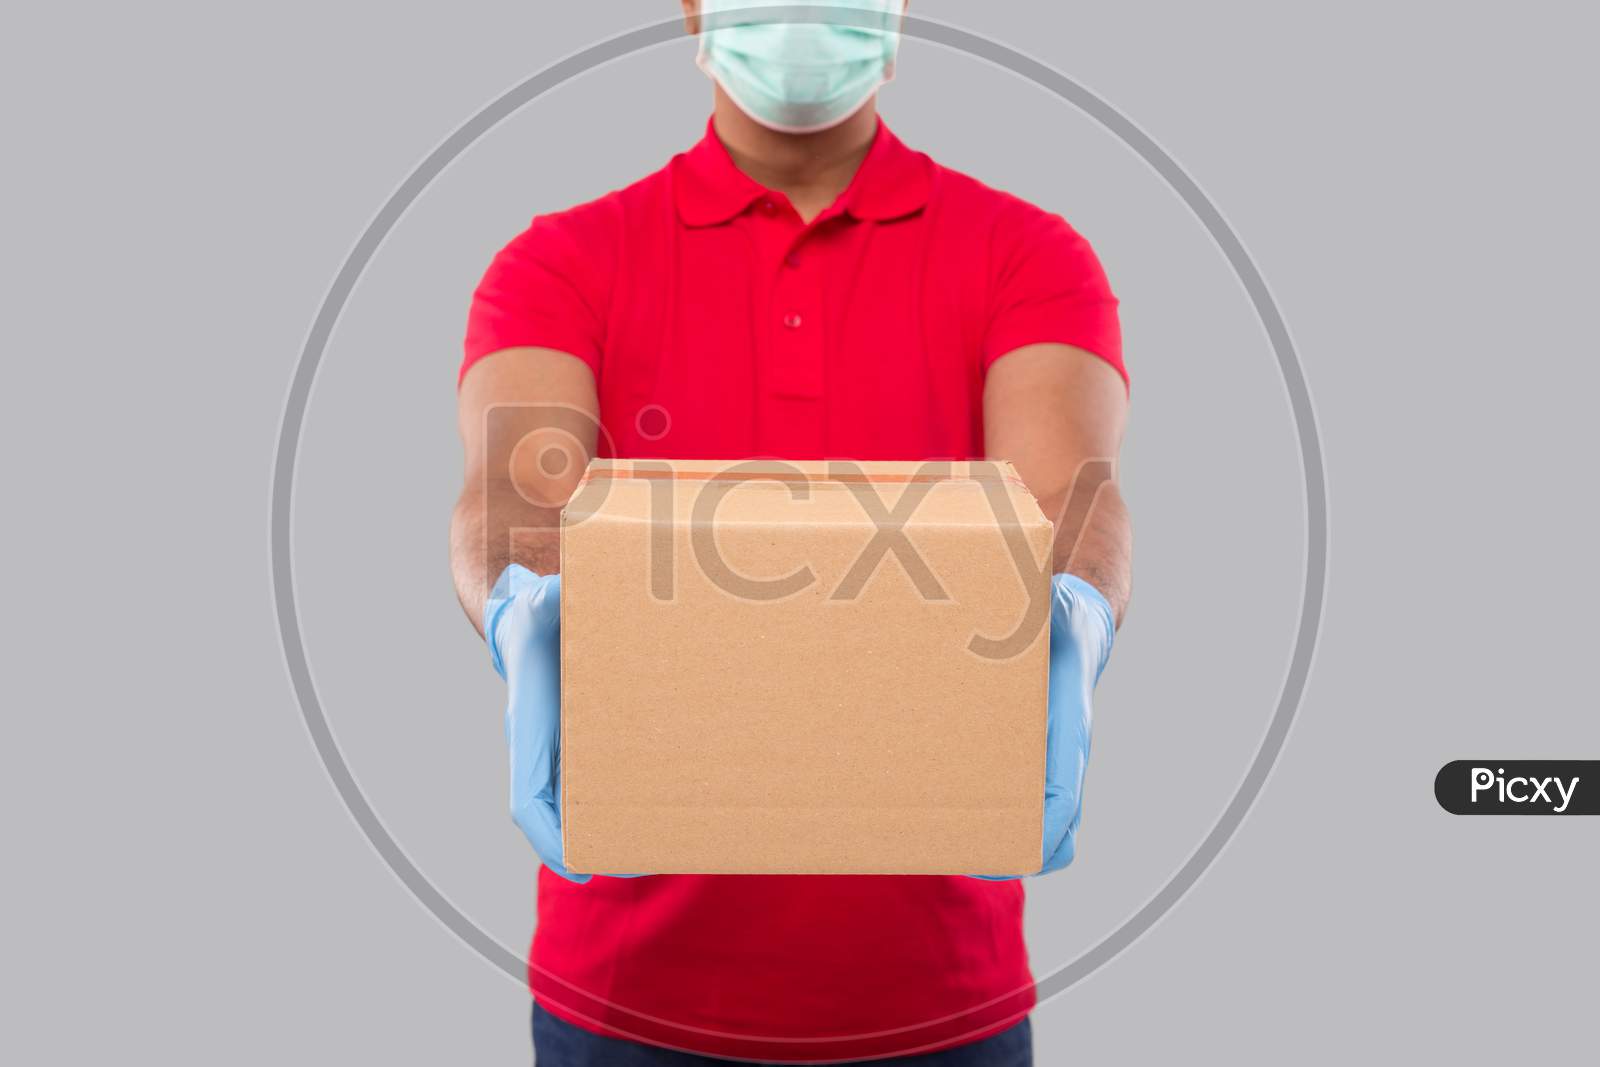 Delivery Man Showing Box In Hands Wearing Medical Mask And Gloves Isolated Close Up. Red Tshirt Indian Delivery Boy. Home Delivery. Quarantine Hero.